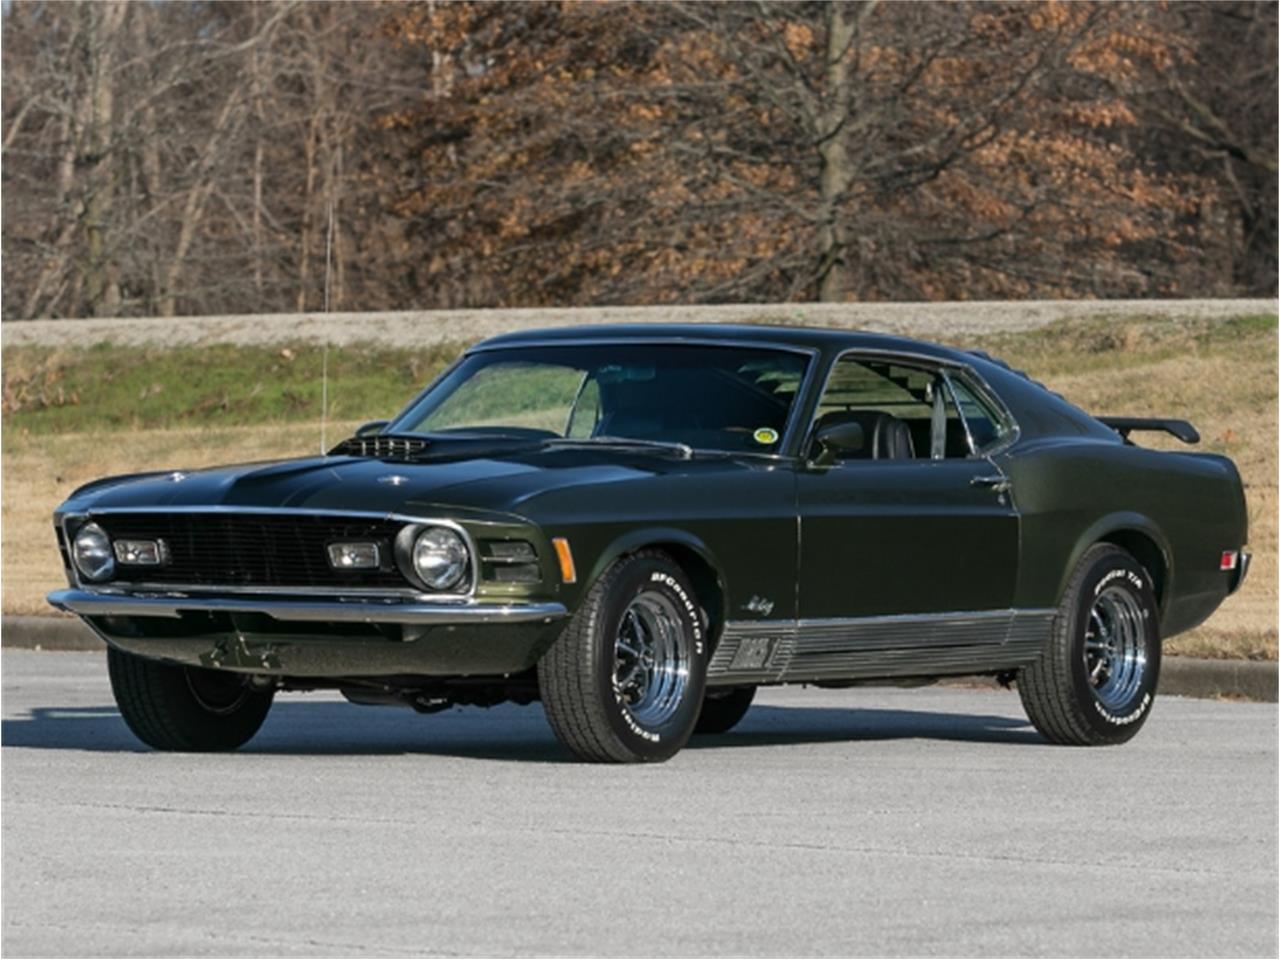 Ford Mustang 1970 Mach 1